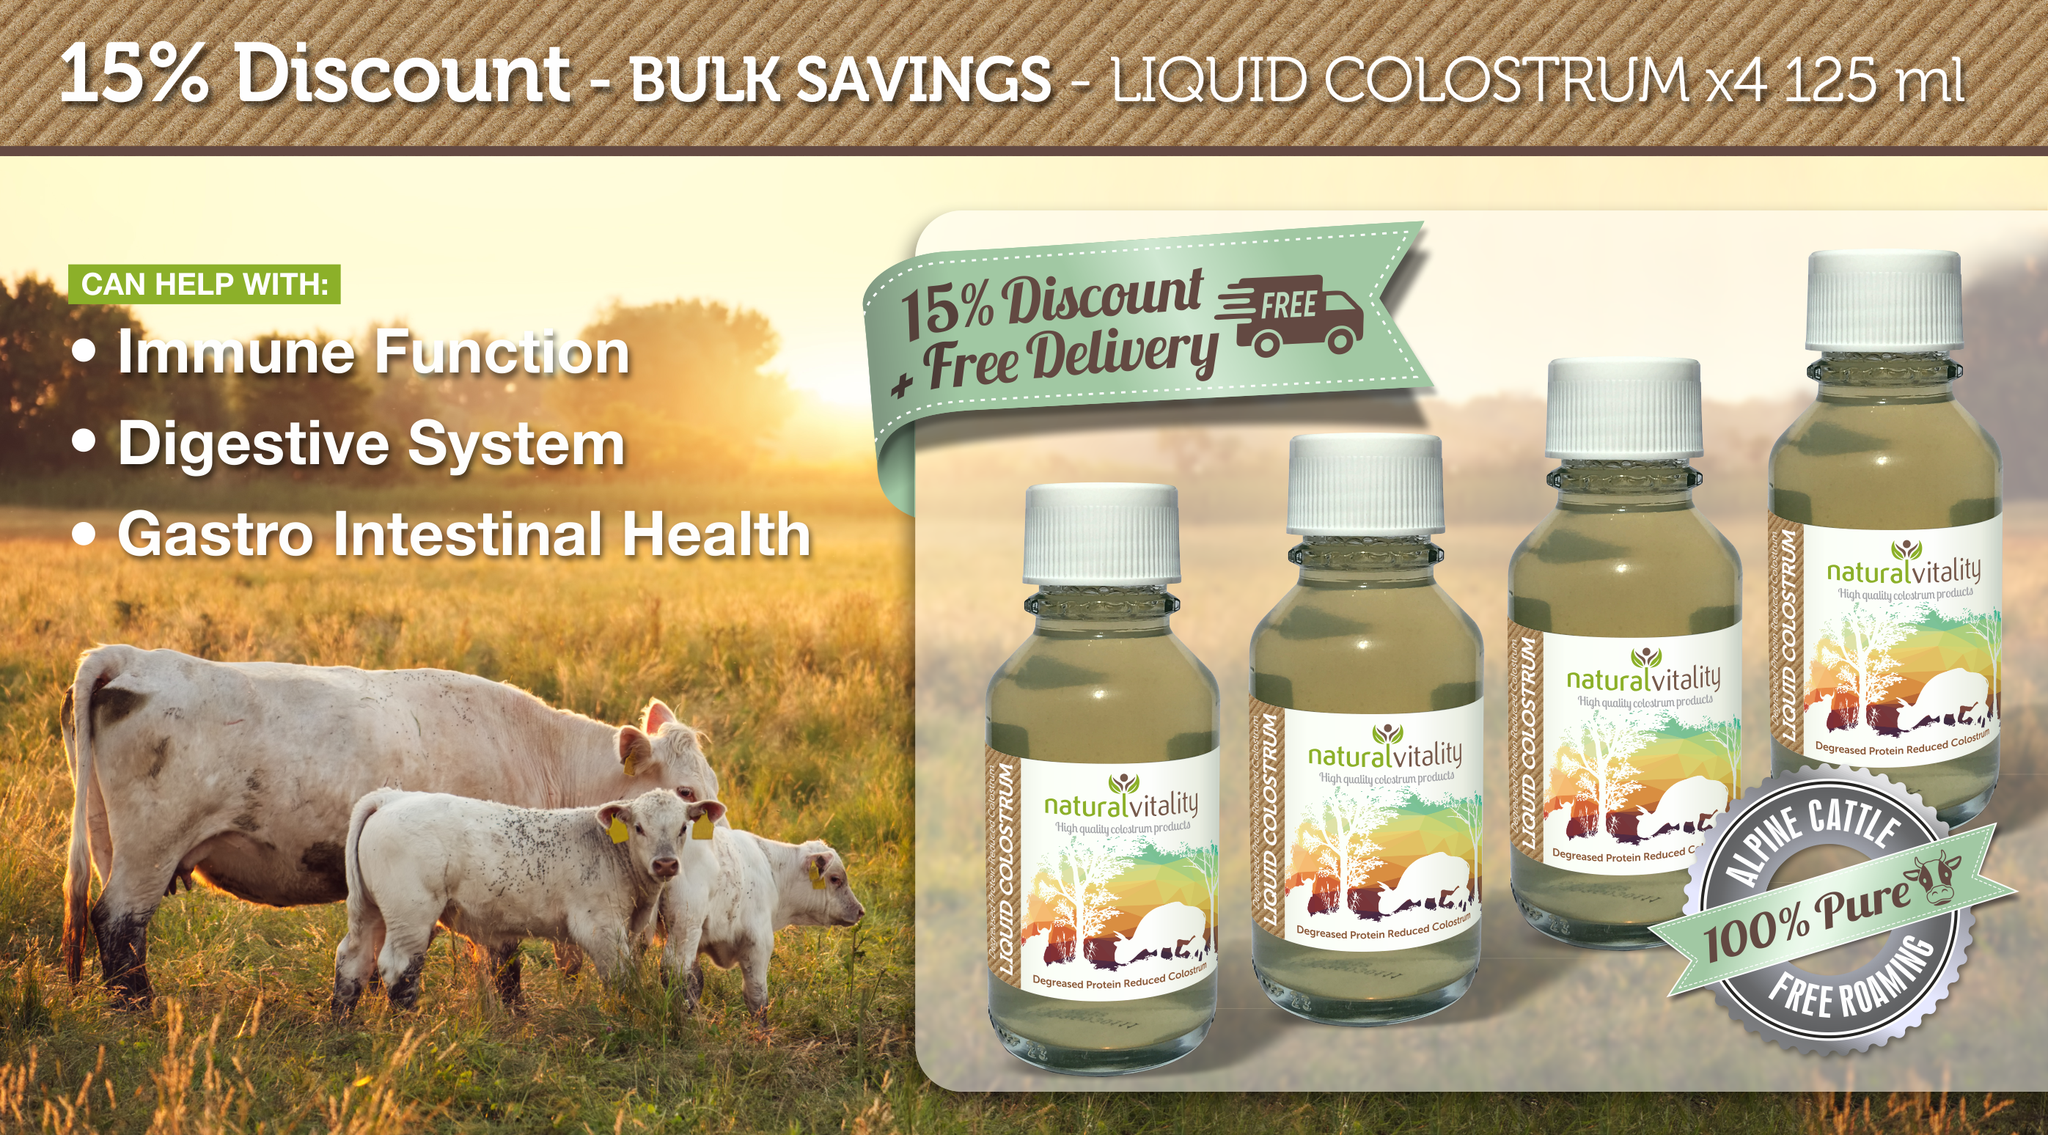 Bulk Discount on Liquid Colostrum by Natural Vitality